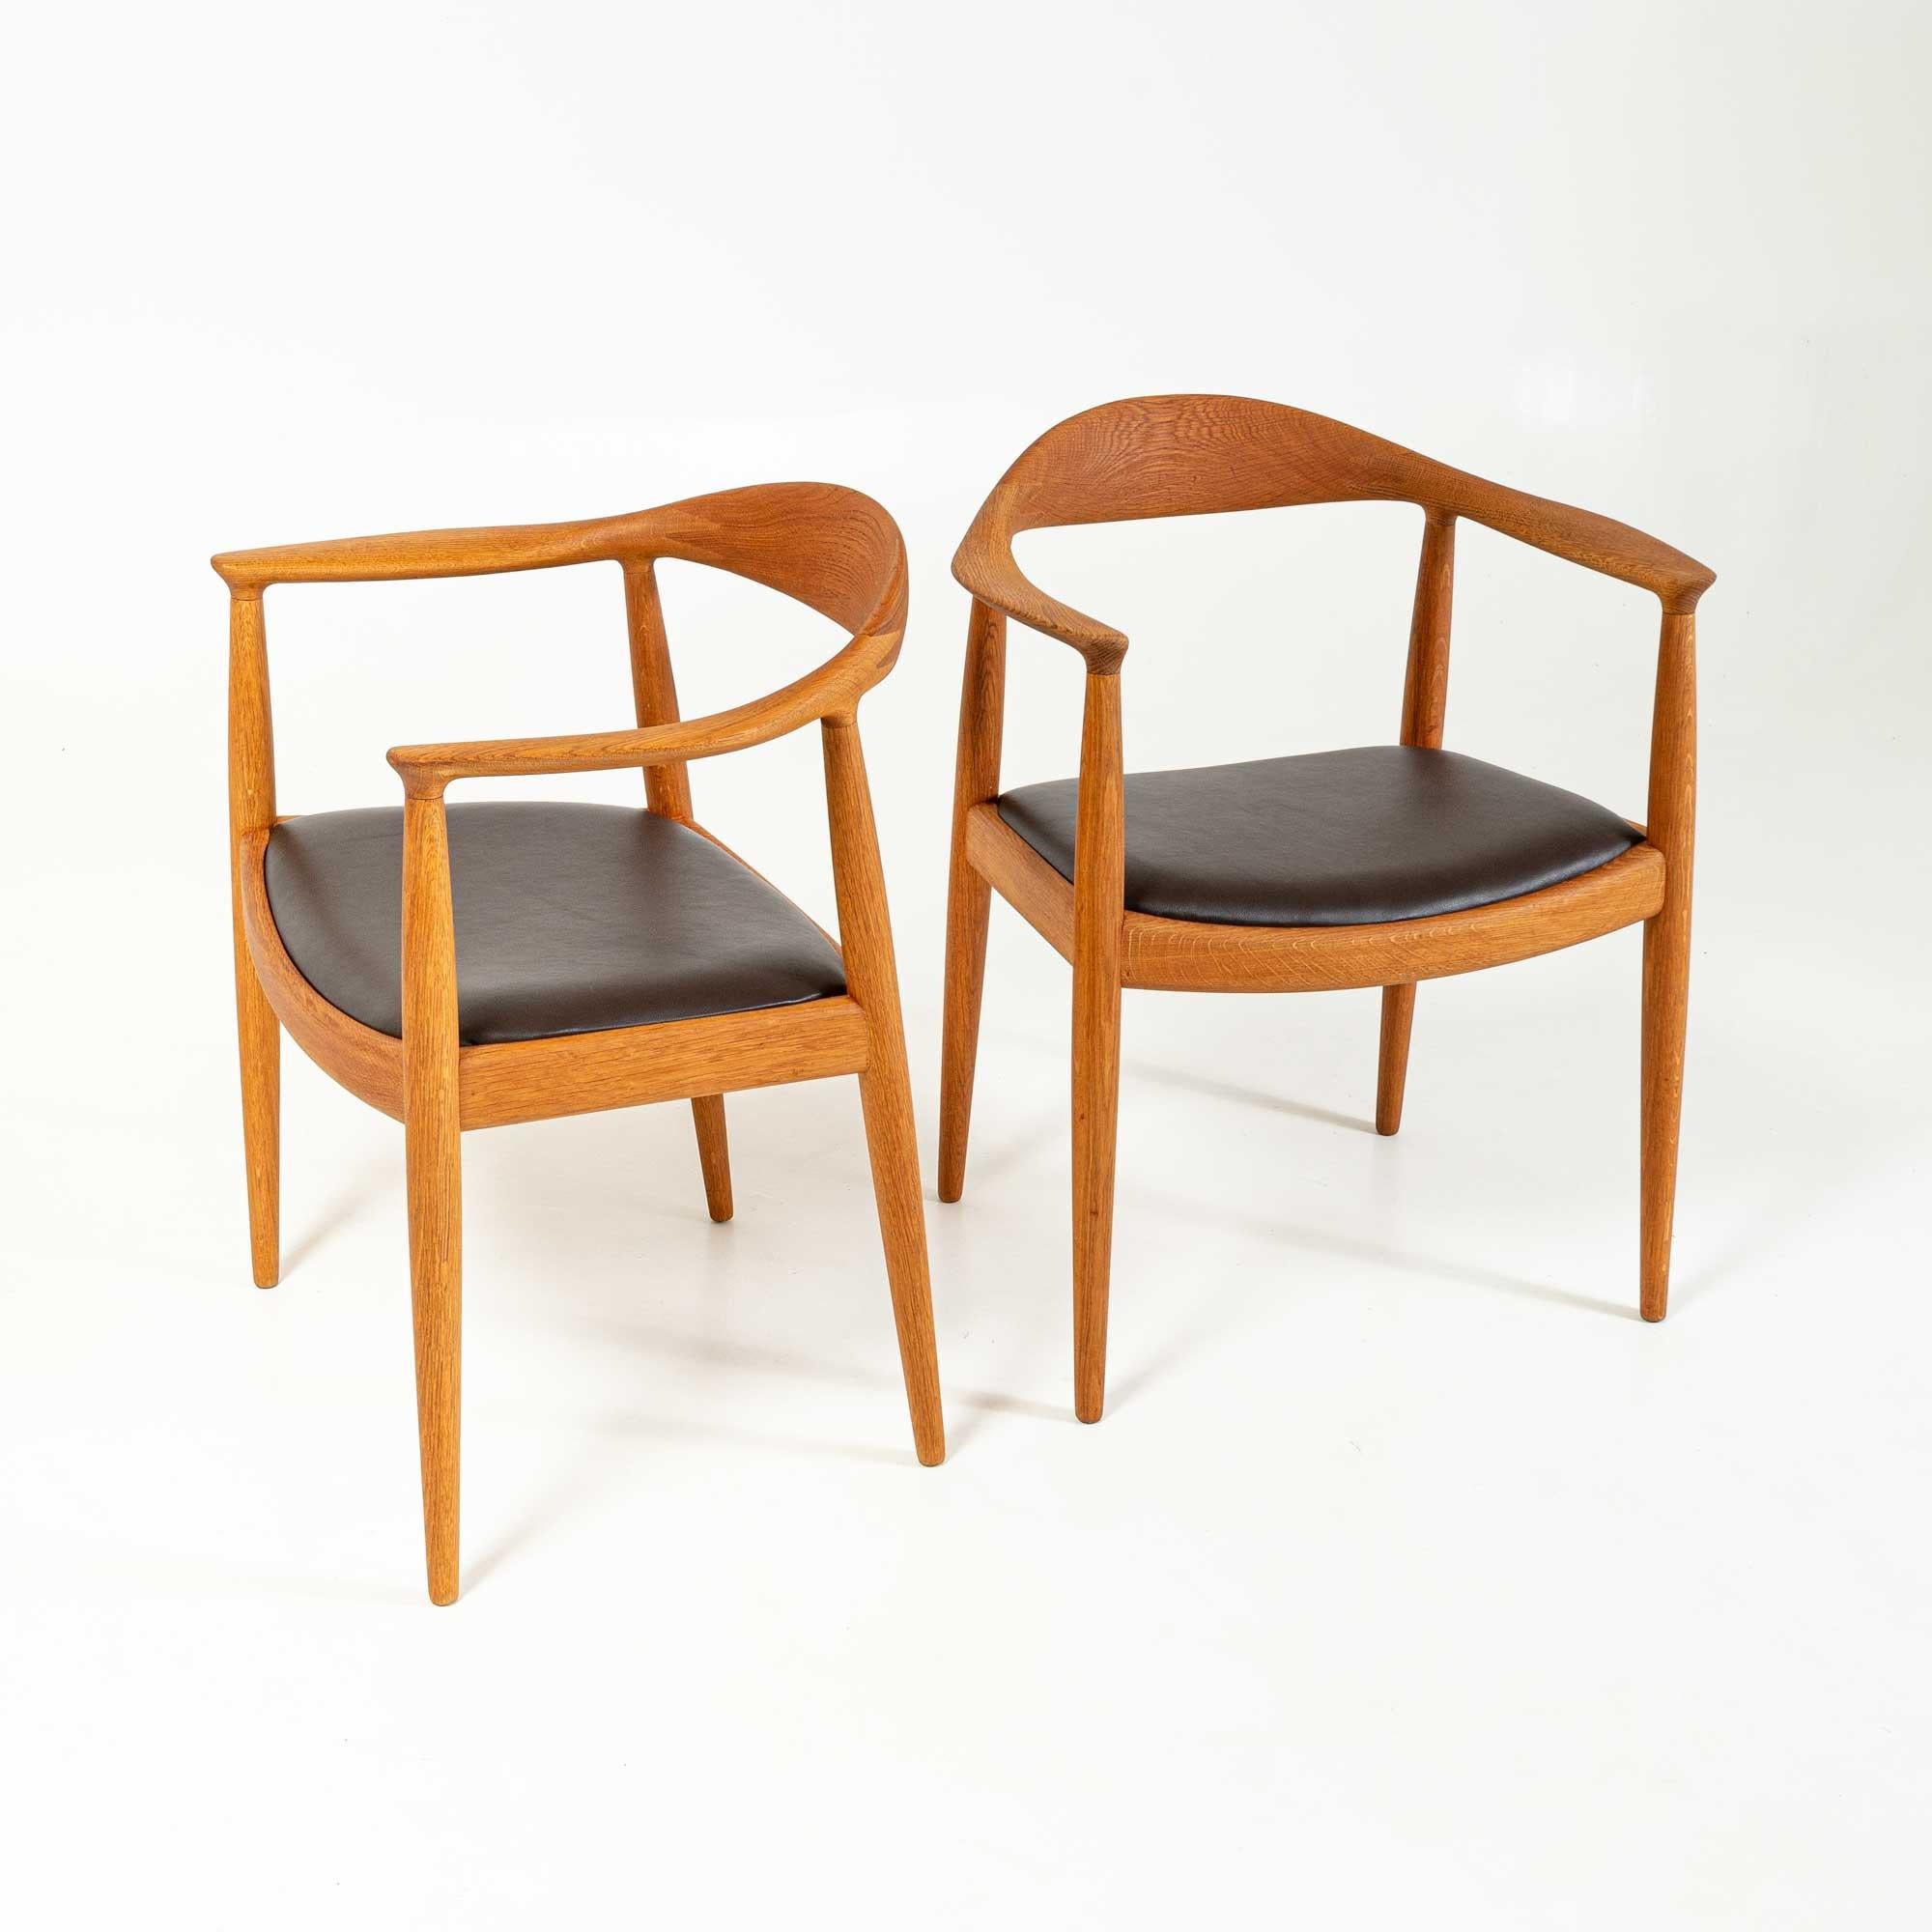 Mid-20th Century Set of 8 Hans Wegner JH503 Round Chairs in Oak & Edelman Chocolate Leather